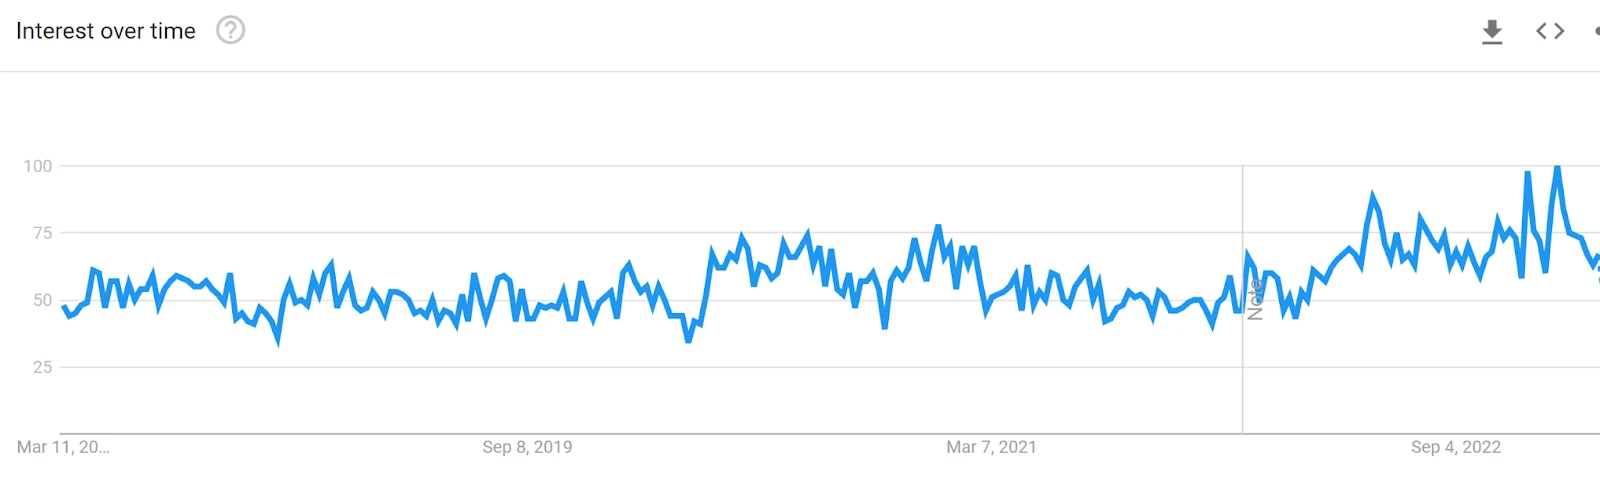 Interest in dropshipping over time